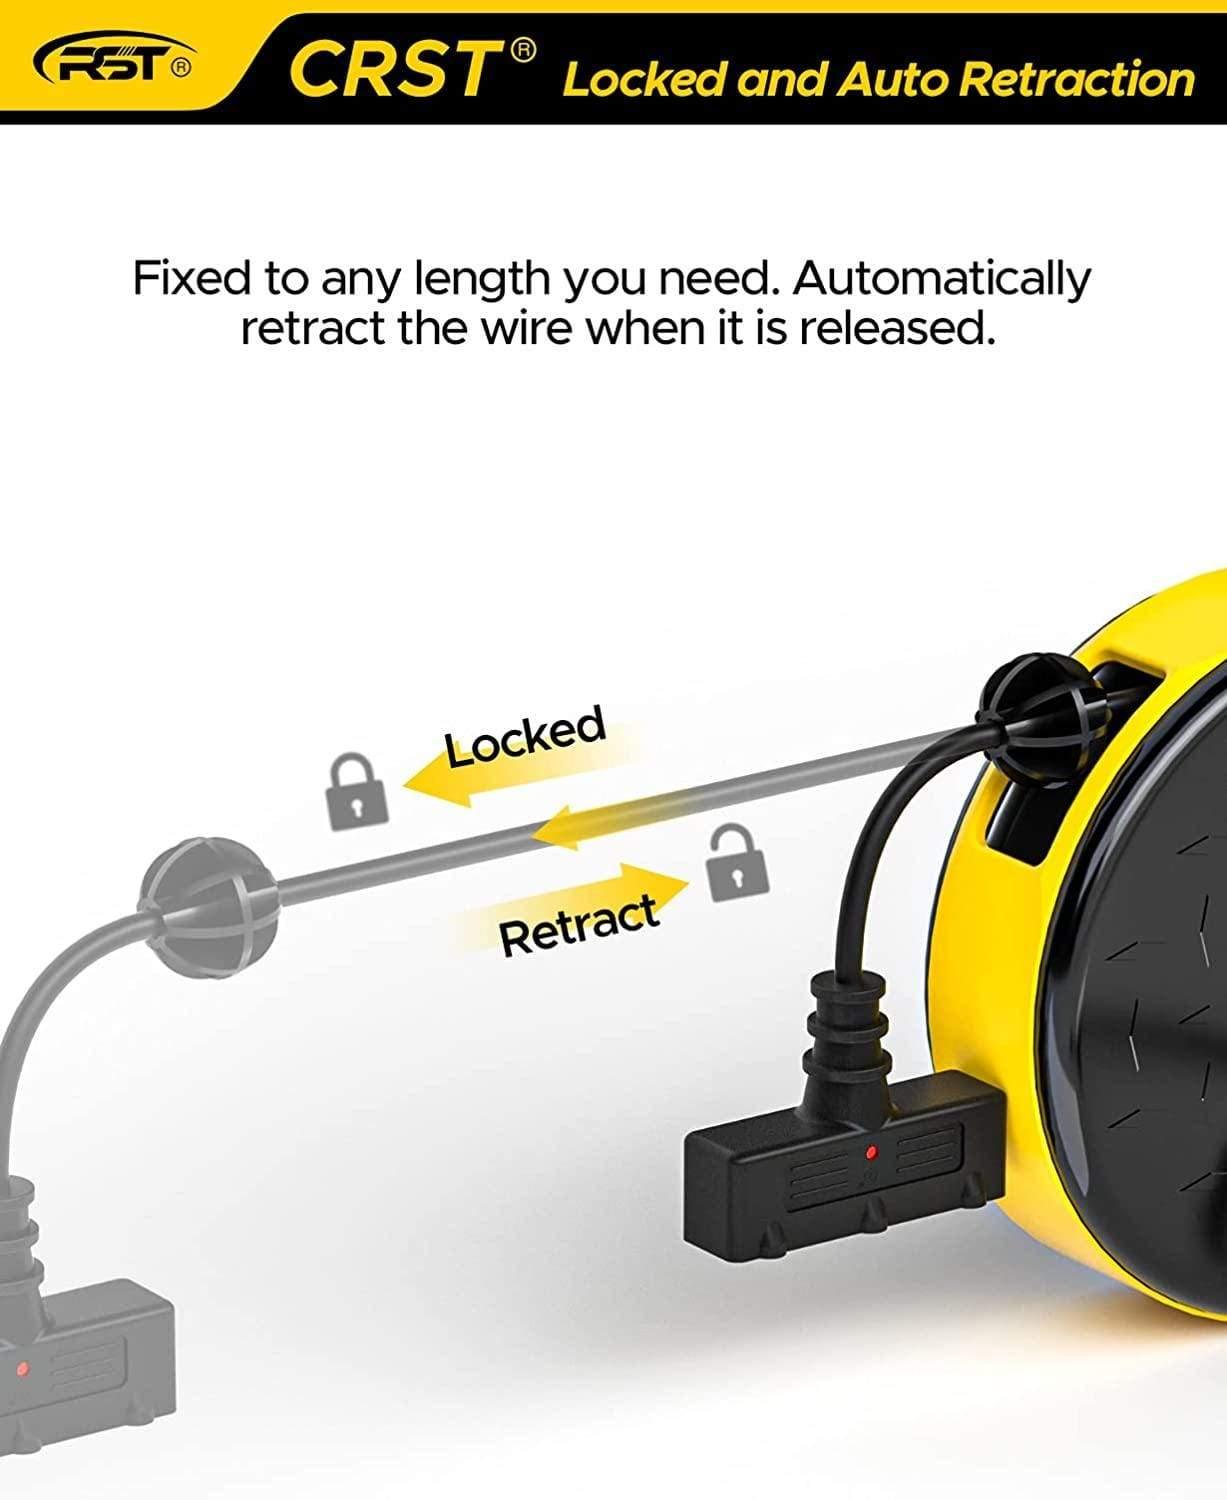 CRST 30ft Retractable Extension Cord Reel with UL Certified 16/3 SJTW Power Cord and 180 Adjustable Mounting Bracket, Size: 30ft Cord, Black